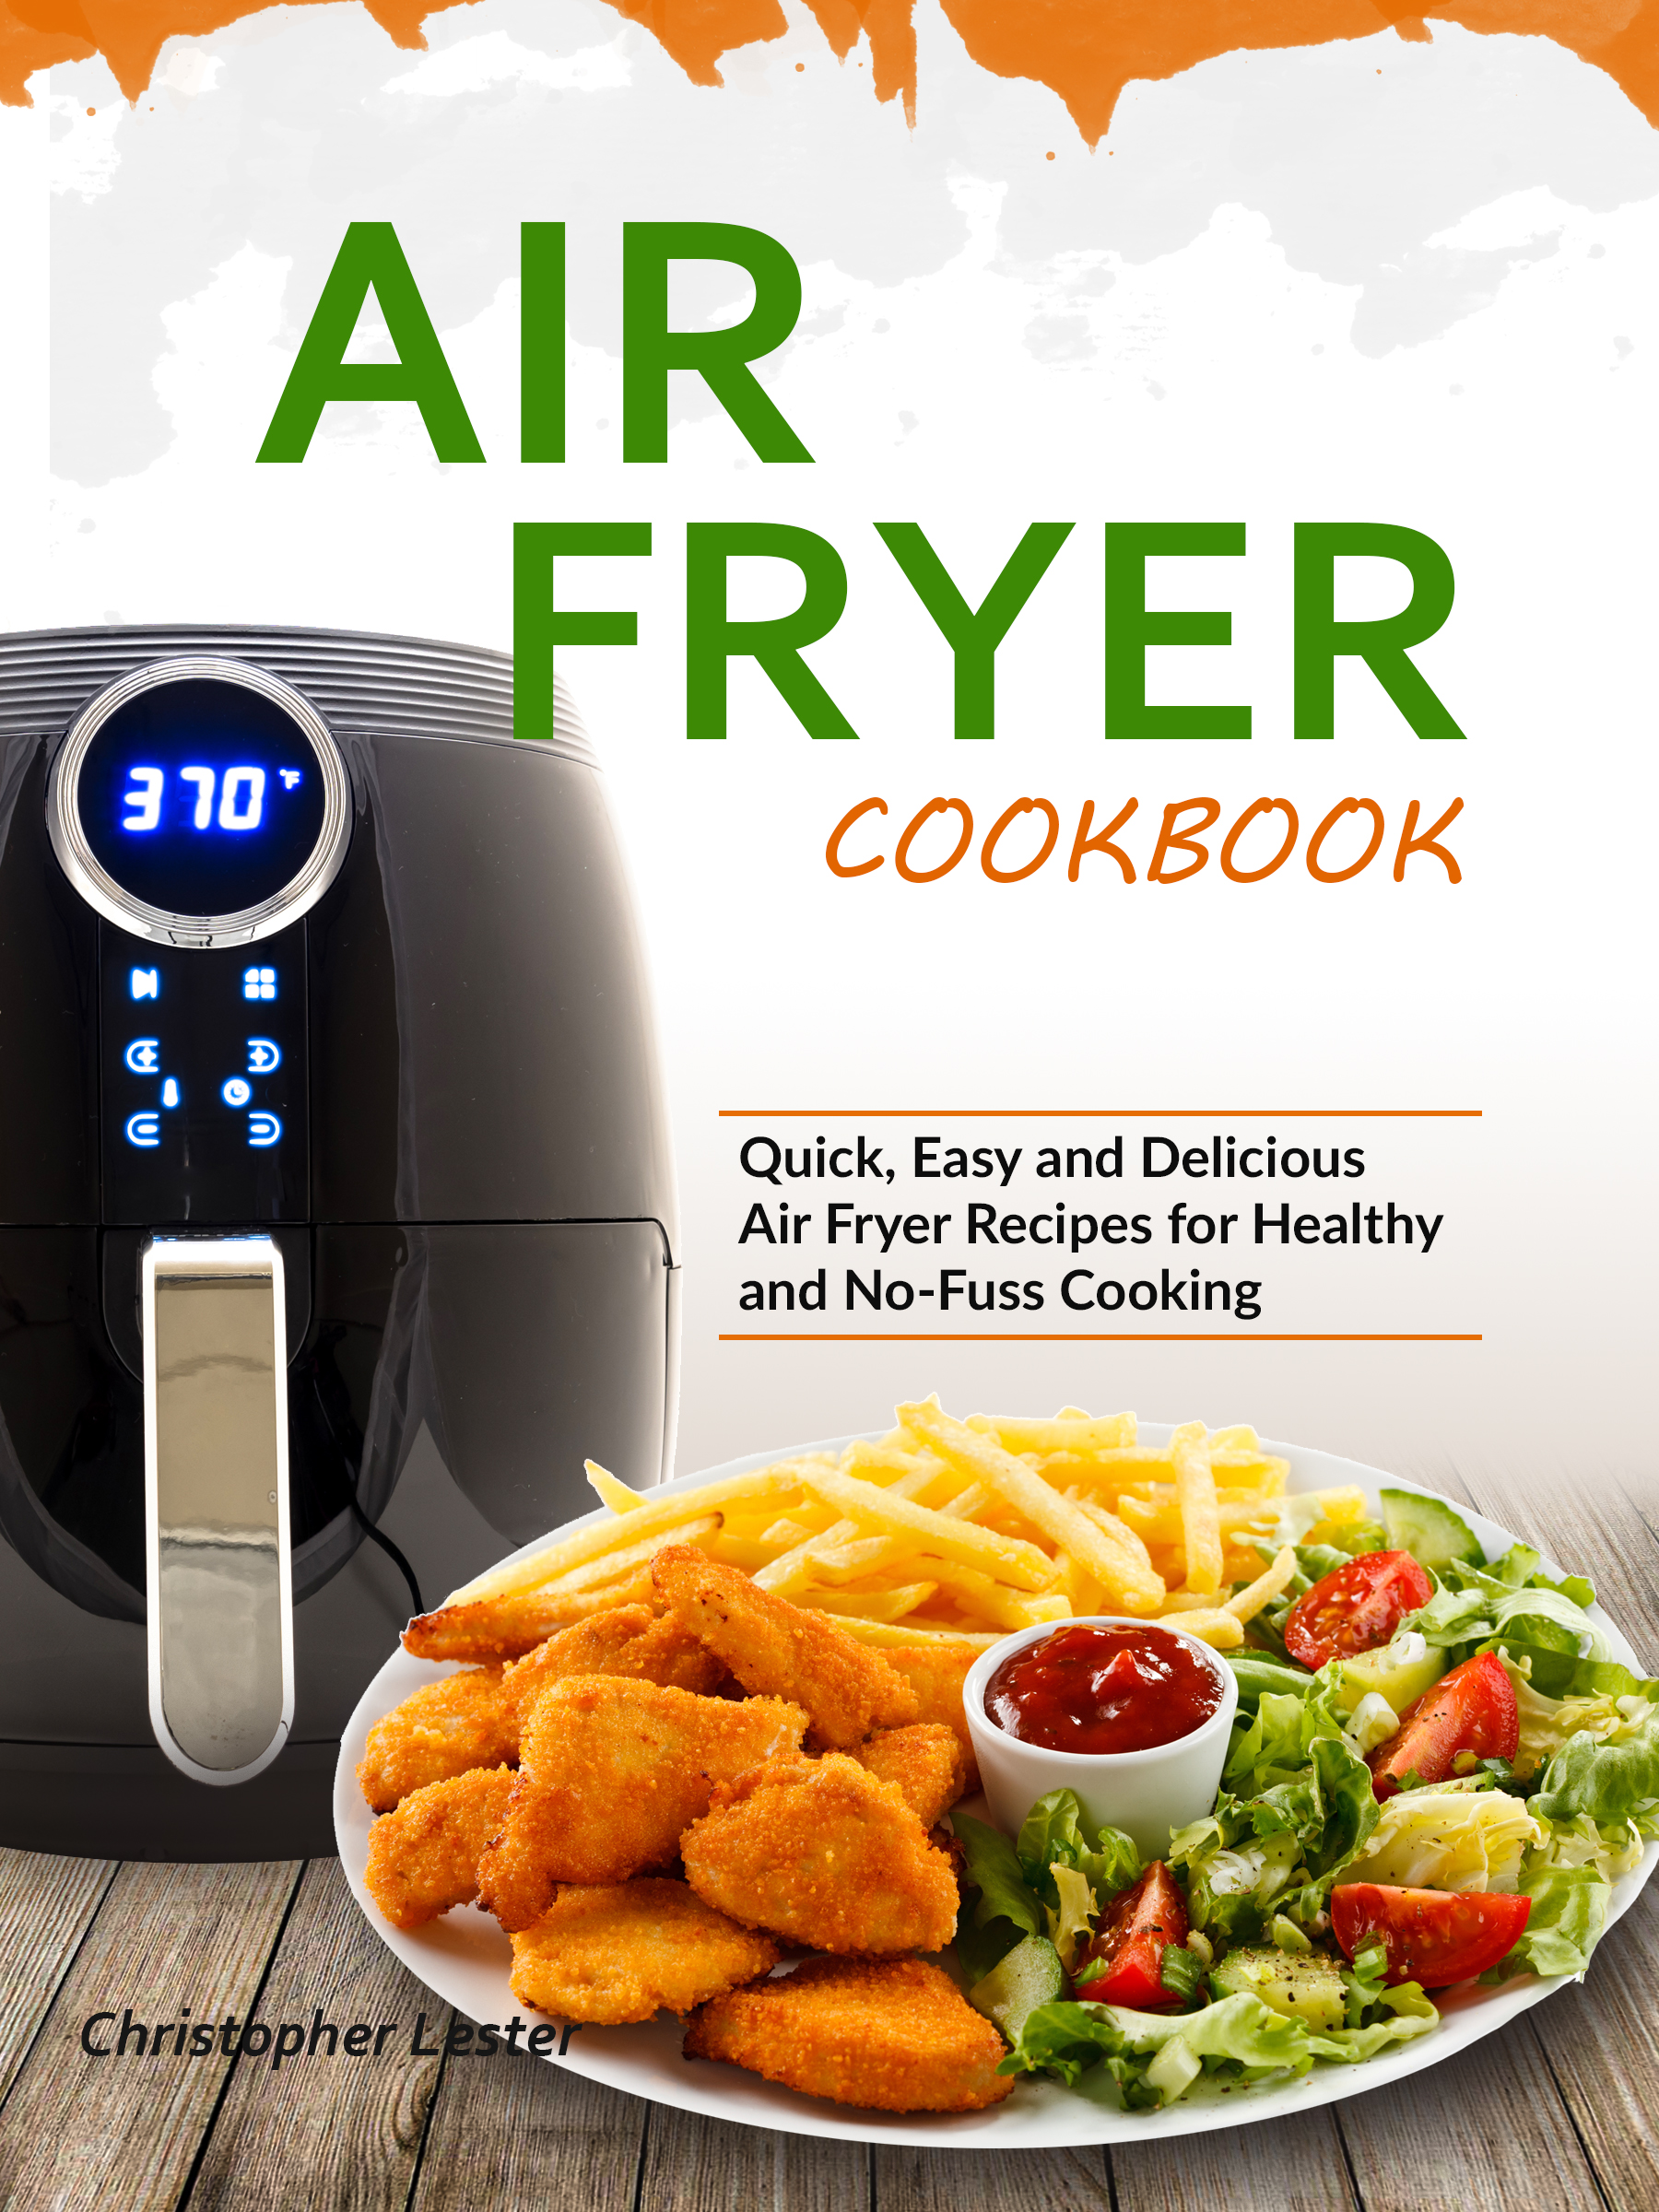 FREE: Air Fryer Cookbook: Quick, Easy and Delicious Air Fryer Recipes for Healthy and No-Fuss Cooking by Christopher Lester